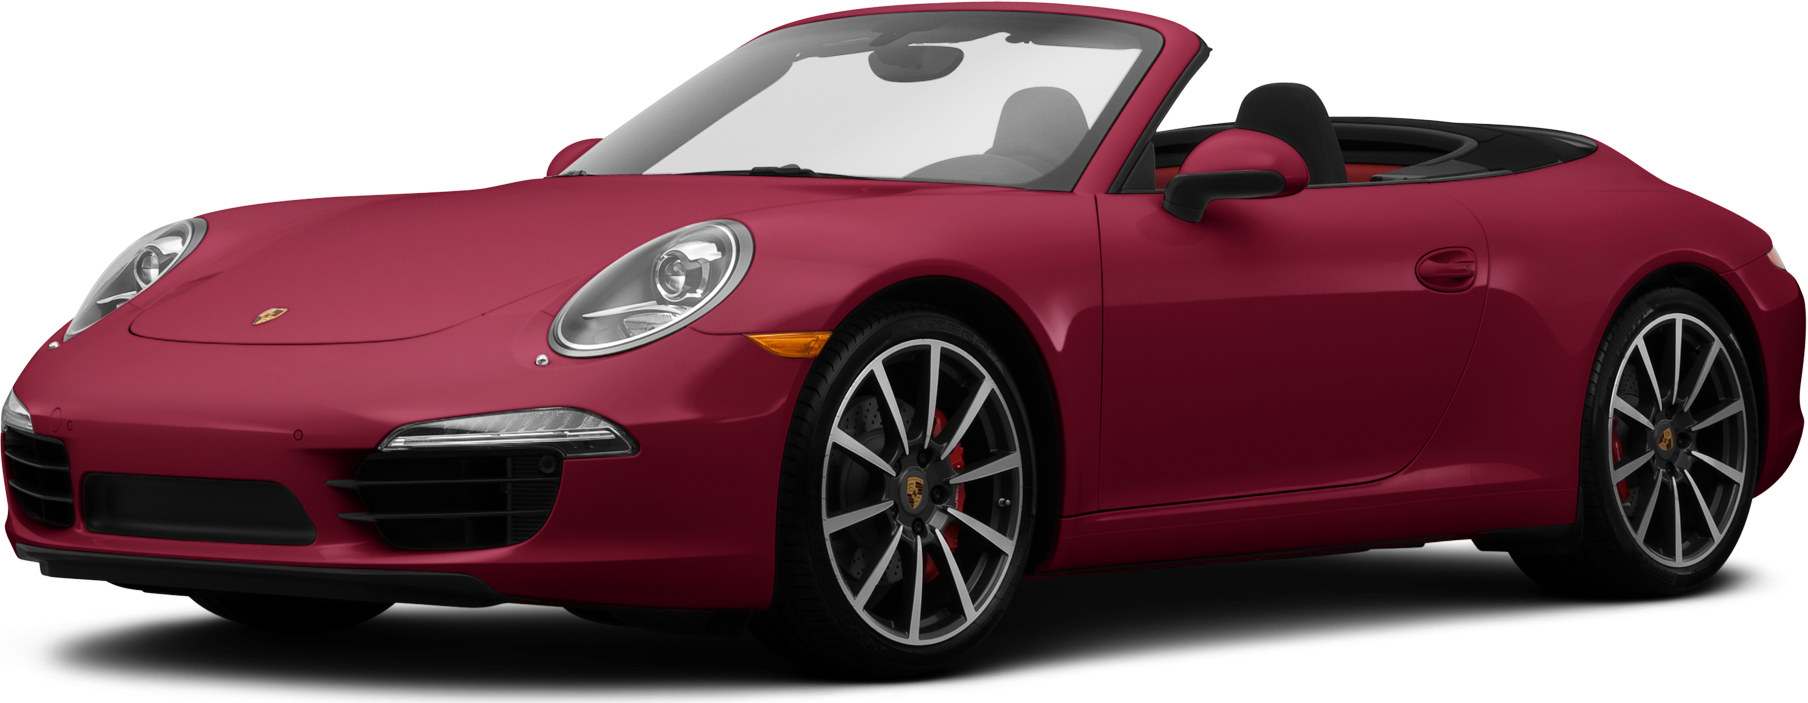 Porsche 911 Turbo S Guards Red with Black Stripes Limited Edition